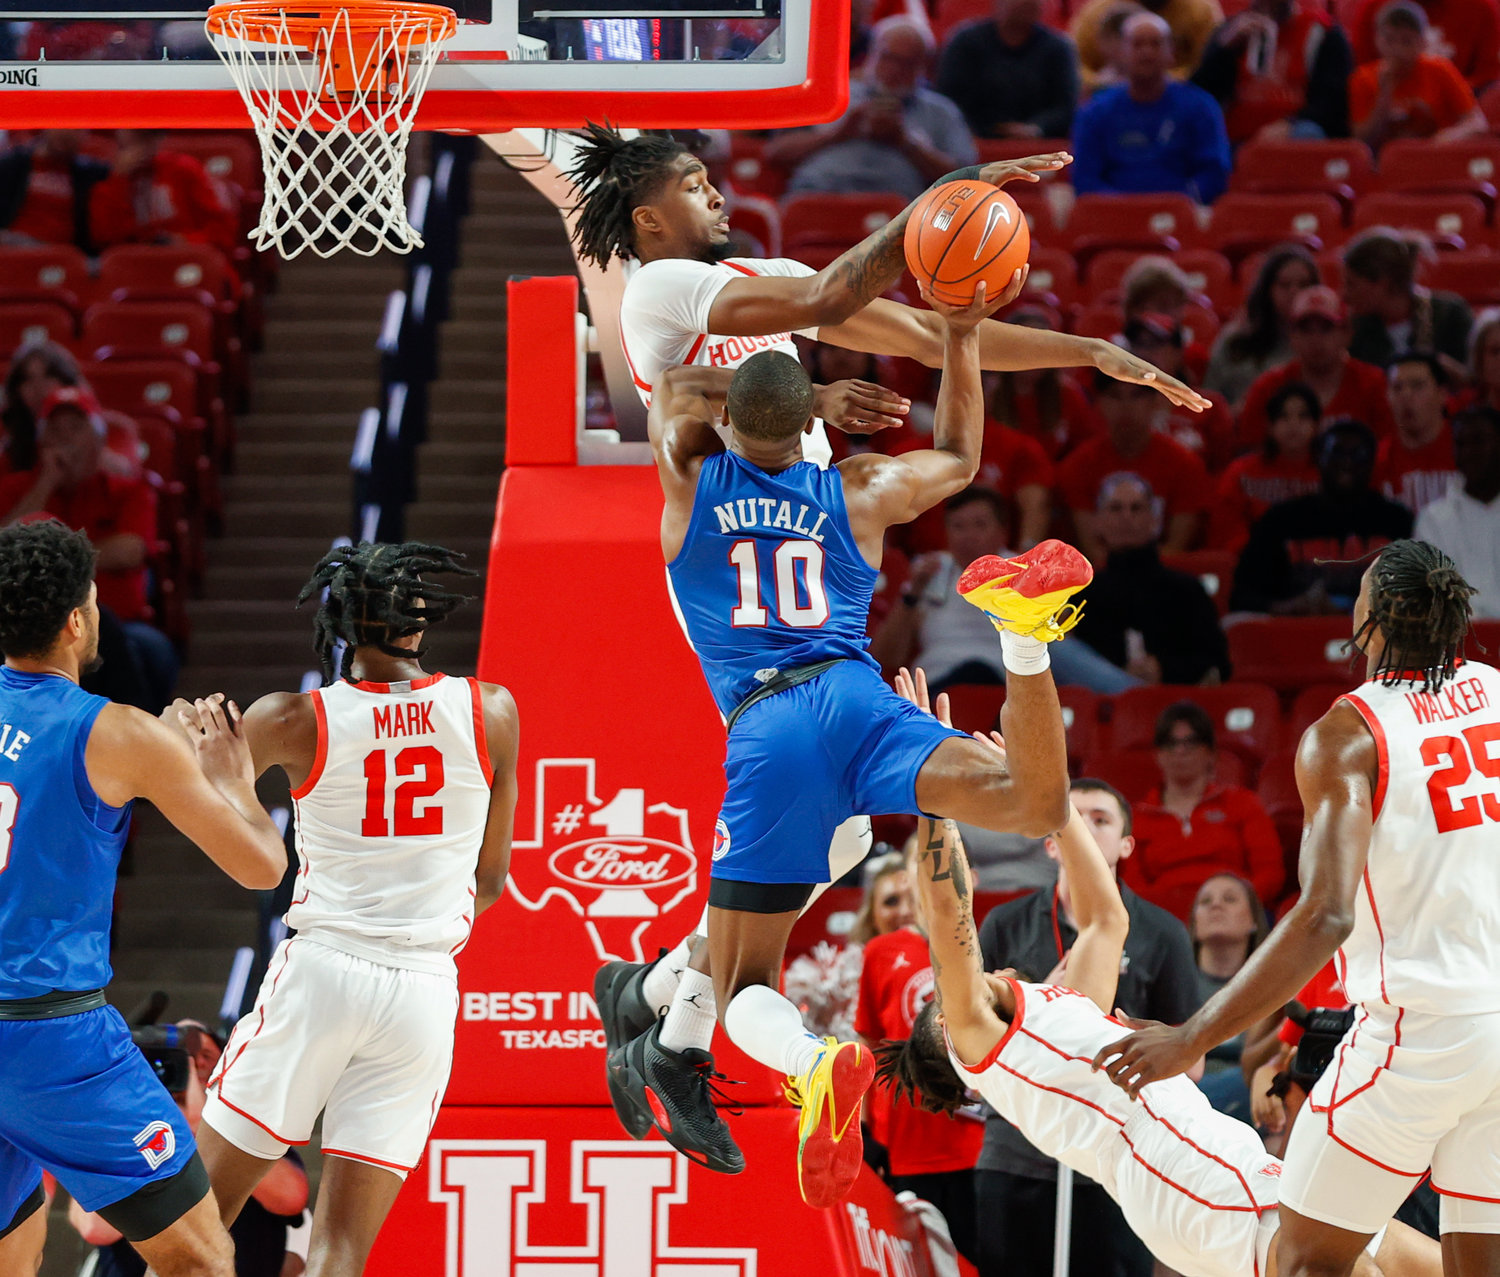 Houston forward Ja'Vier Francis (5) blocks a shot by SMU guard Zach Nutall (10) during an NCAA men’s basketball game between the Houston Cougars and the Southern Methodist Mustangs on Jan. 5, 2023 in Houston. Houston won, 87-53,